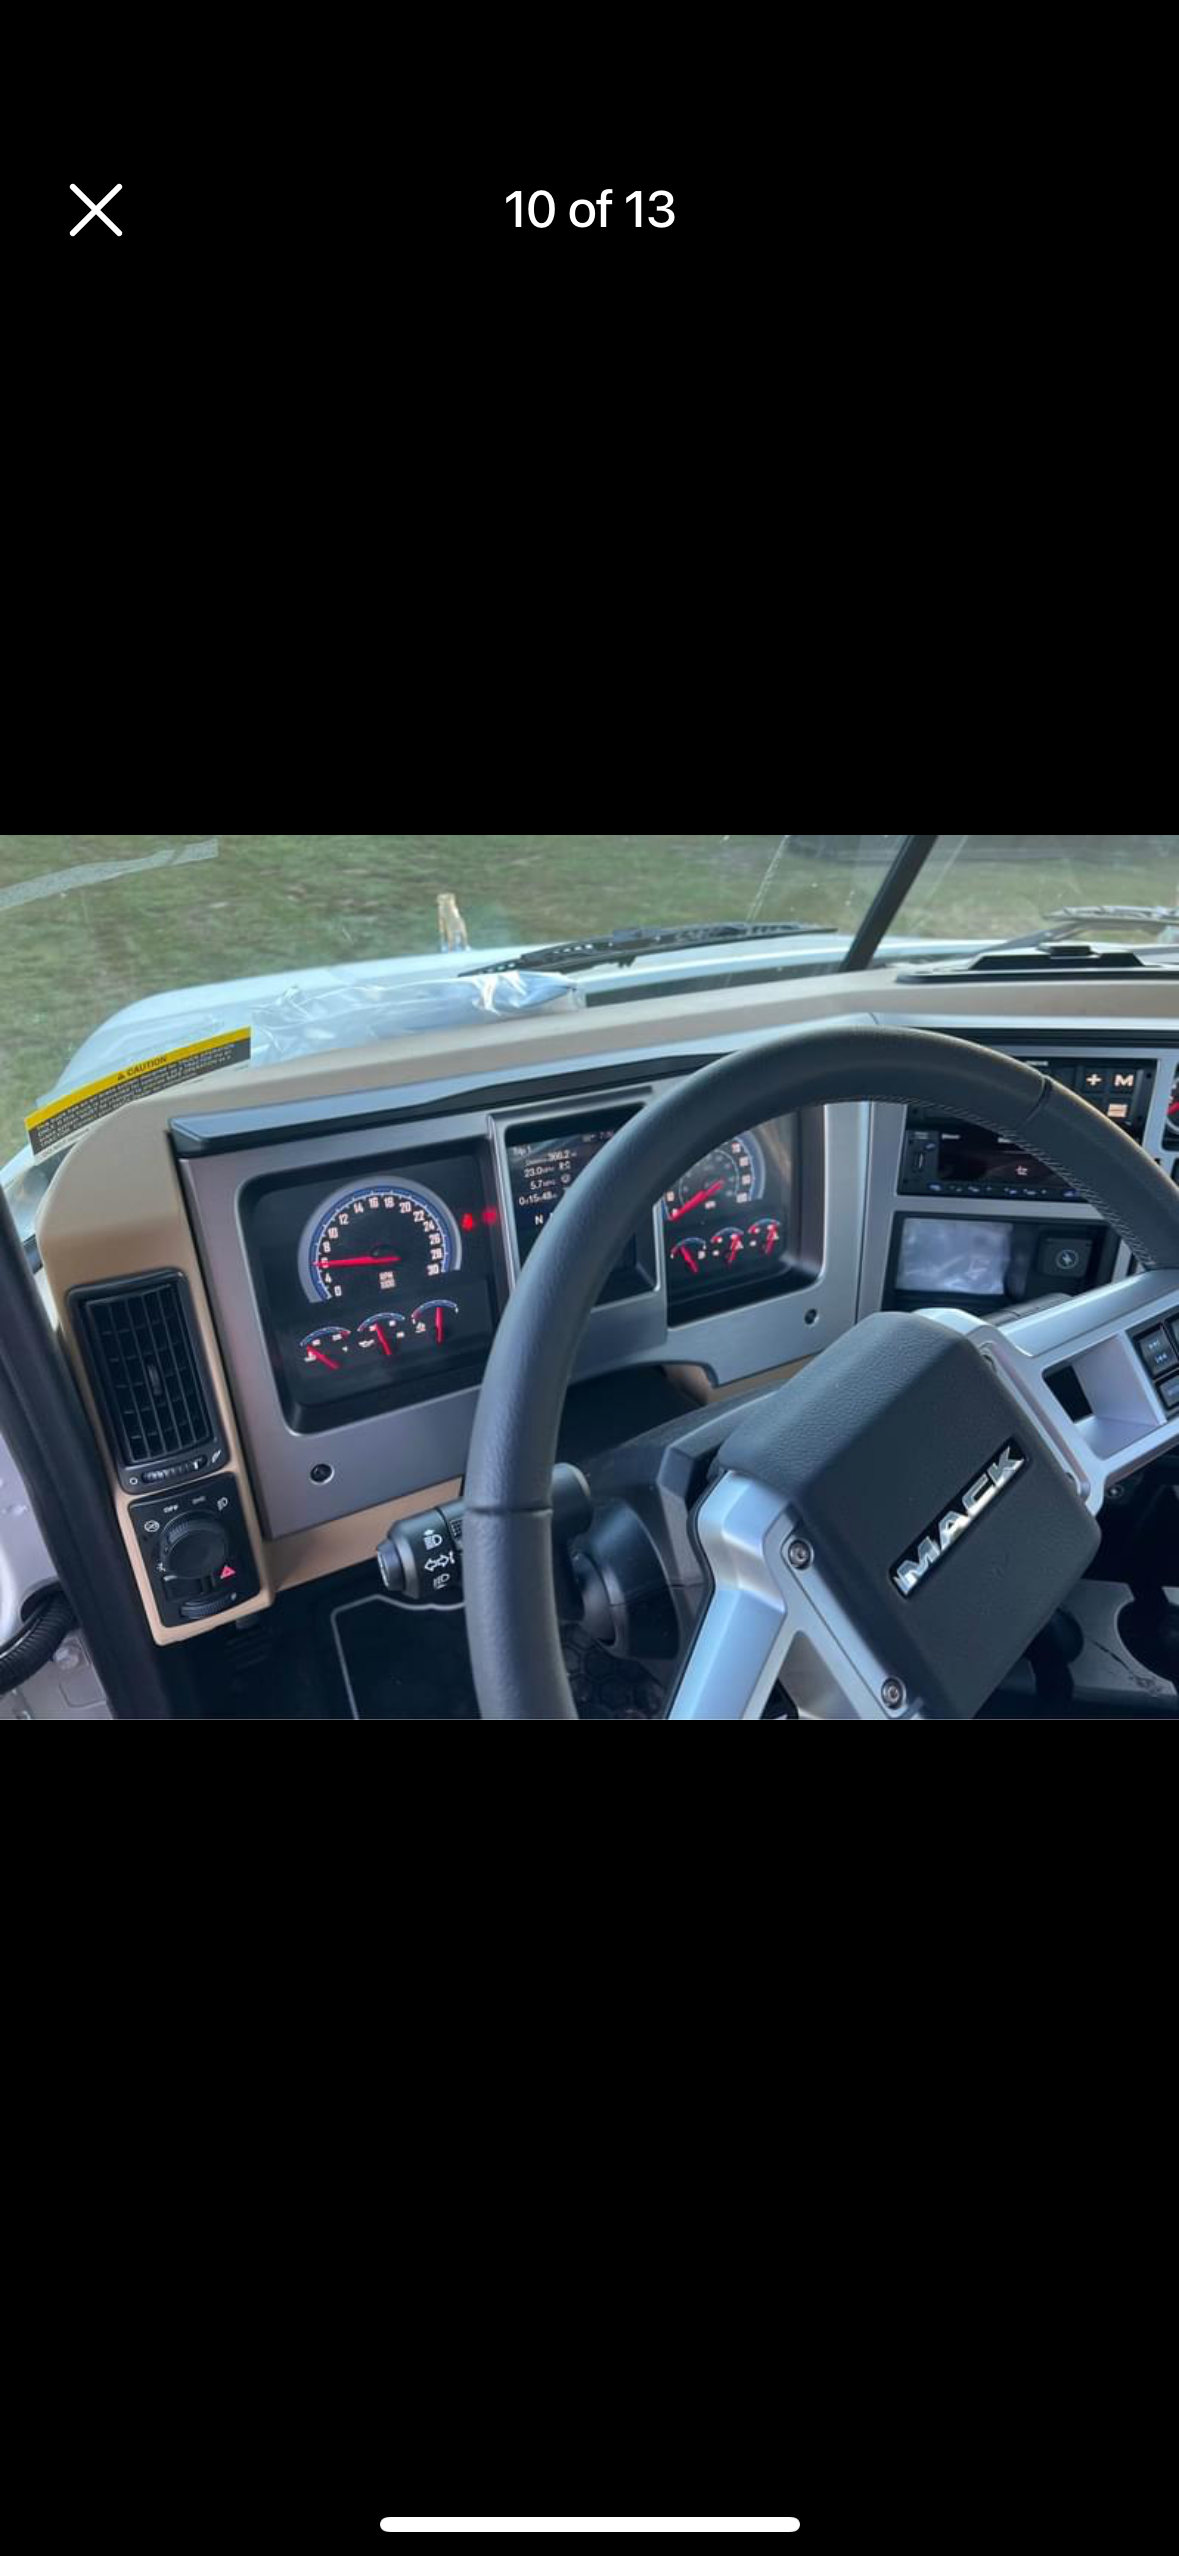 The inside of a truck with a steering wheel and dashboard.